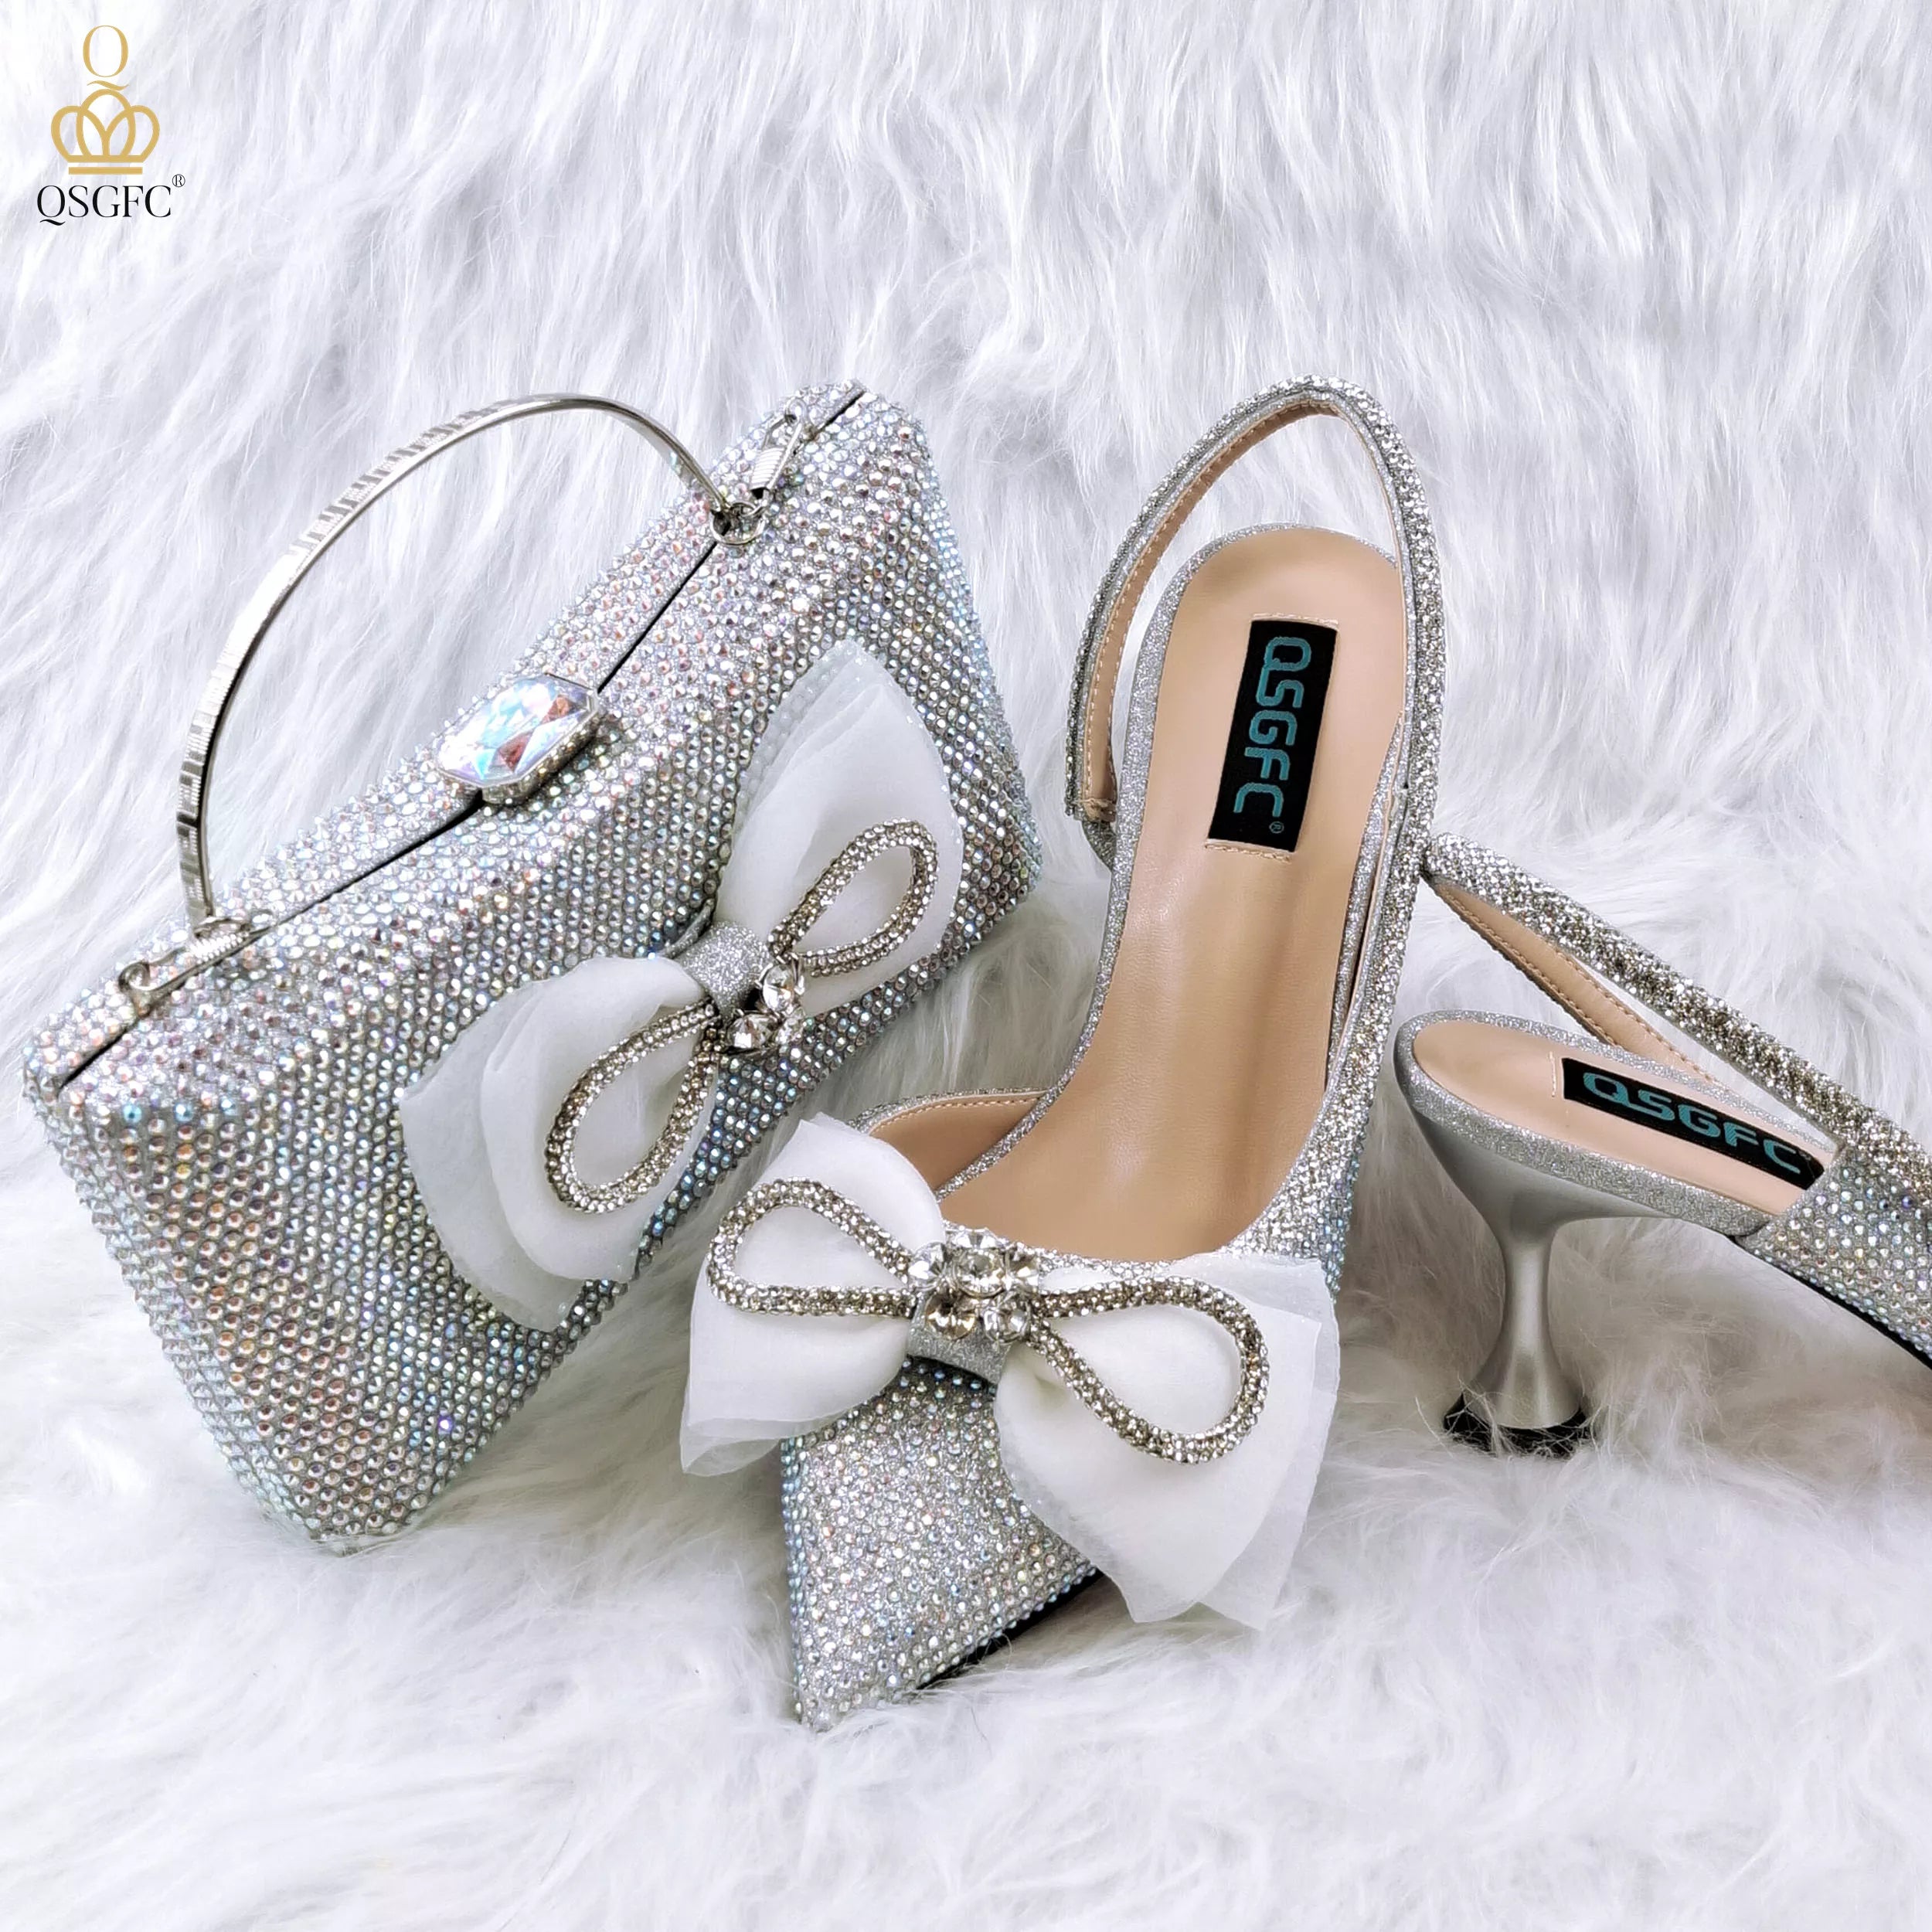 Style Rhinestone Bow Side Empty Party High Heels Pointed Toe Stiletto Heels Silver Women's Shoes And Bags